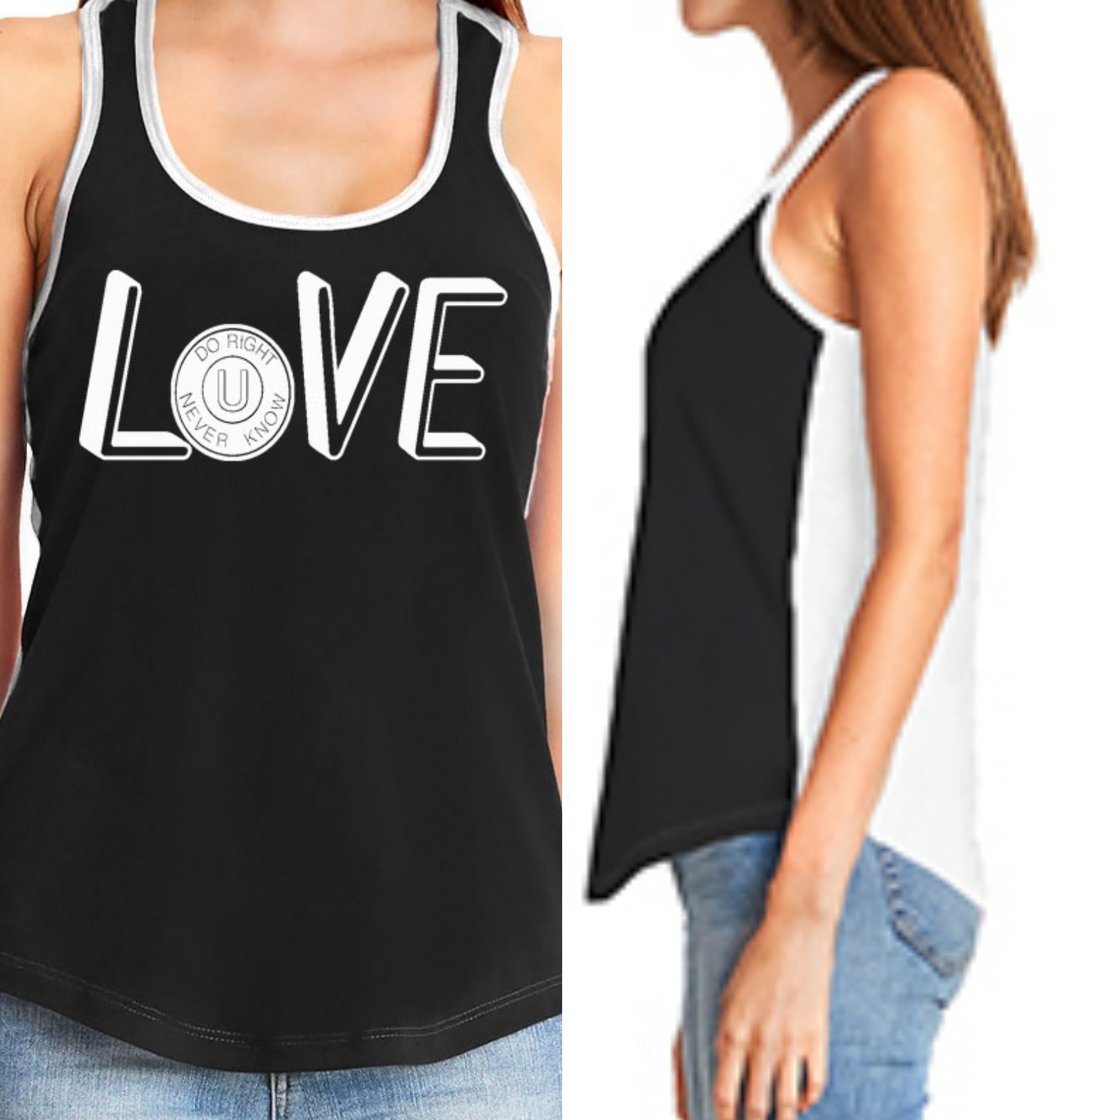 Image of "LOVE" Tank Top Wht/Blk